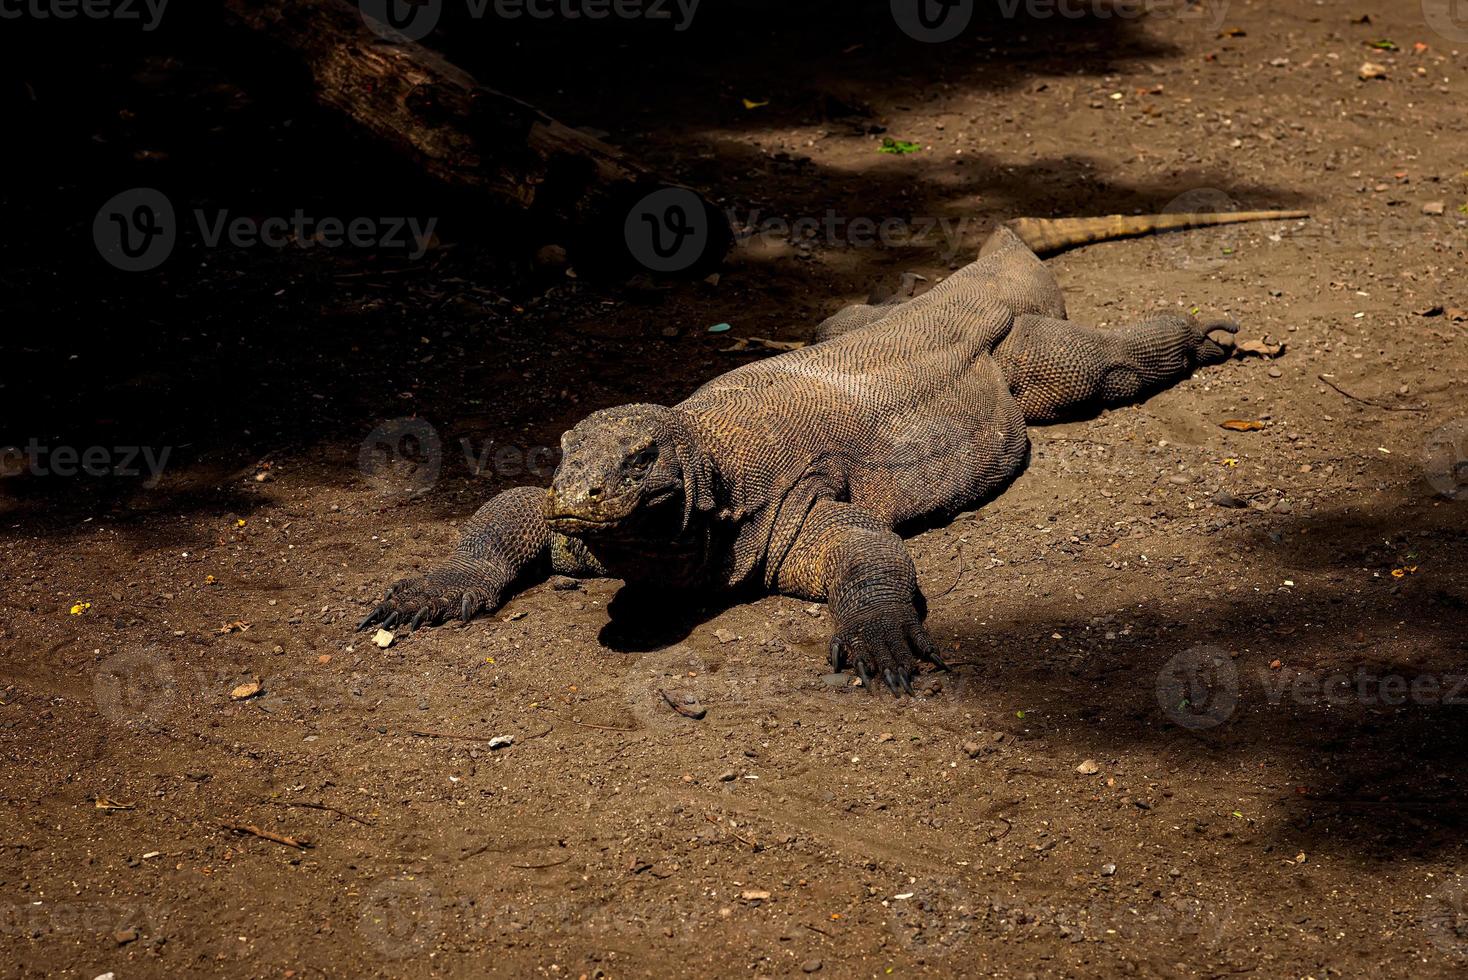 Komodo Dragon. The largest lizard in the world. The Komodo dragon is an animal protected by the Indonesian government. photo